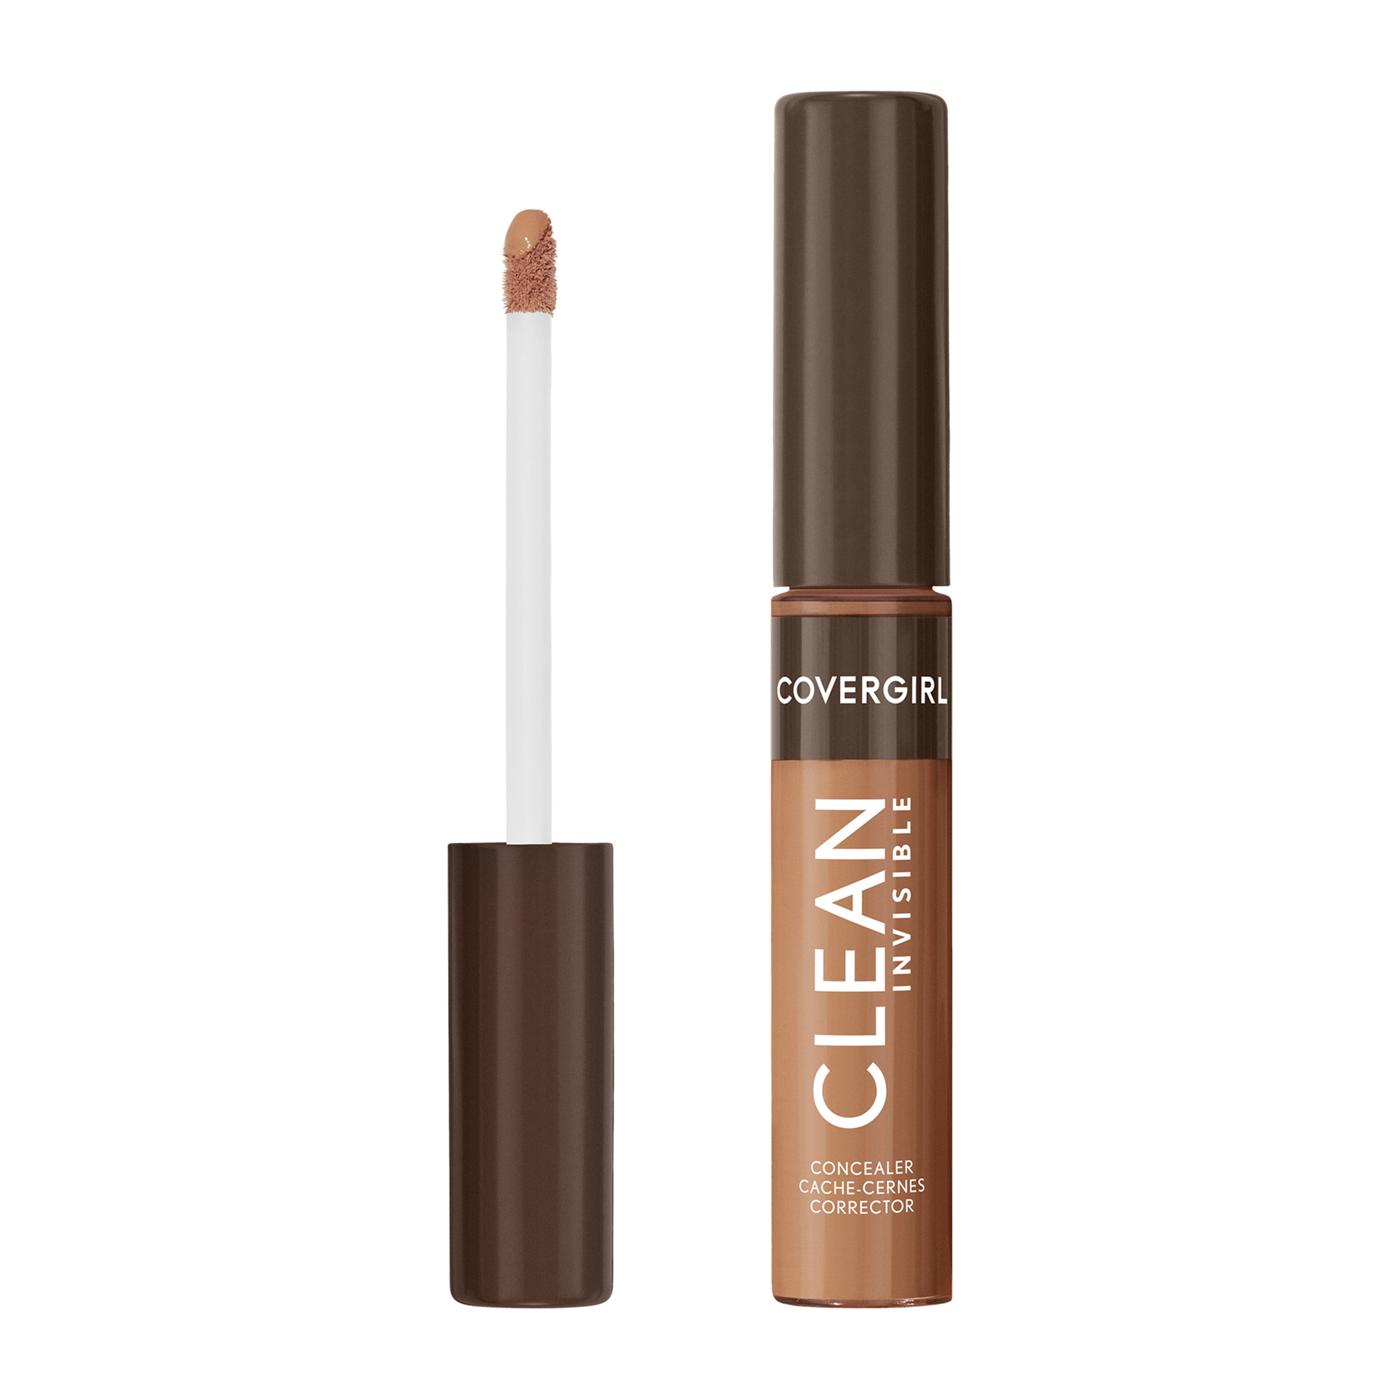 Covergirl Clean Invisible Concealer - Golden Caramel; image 14 of 15